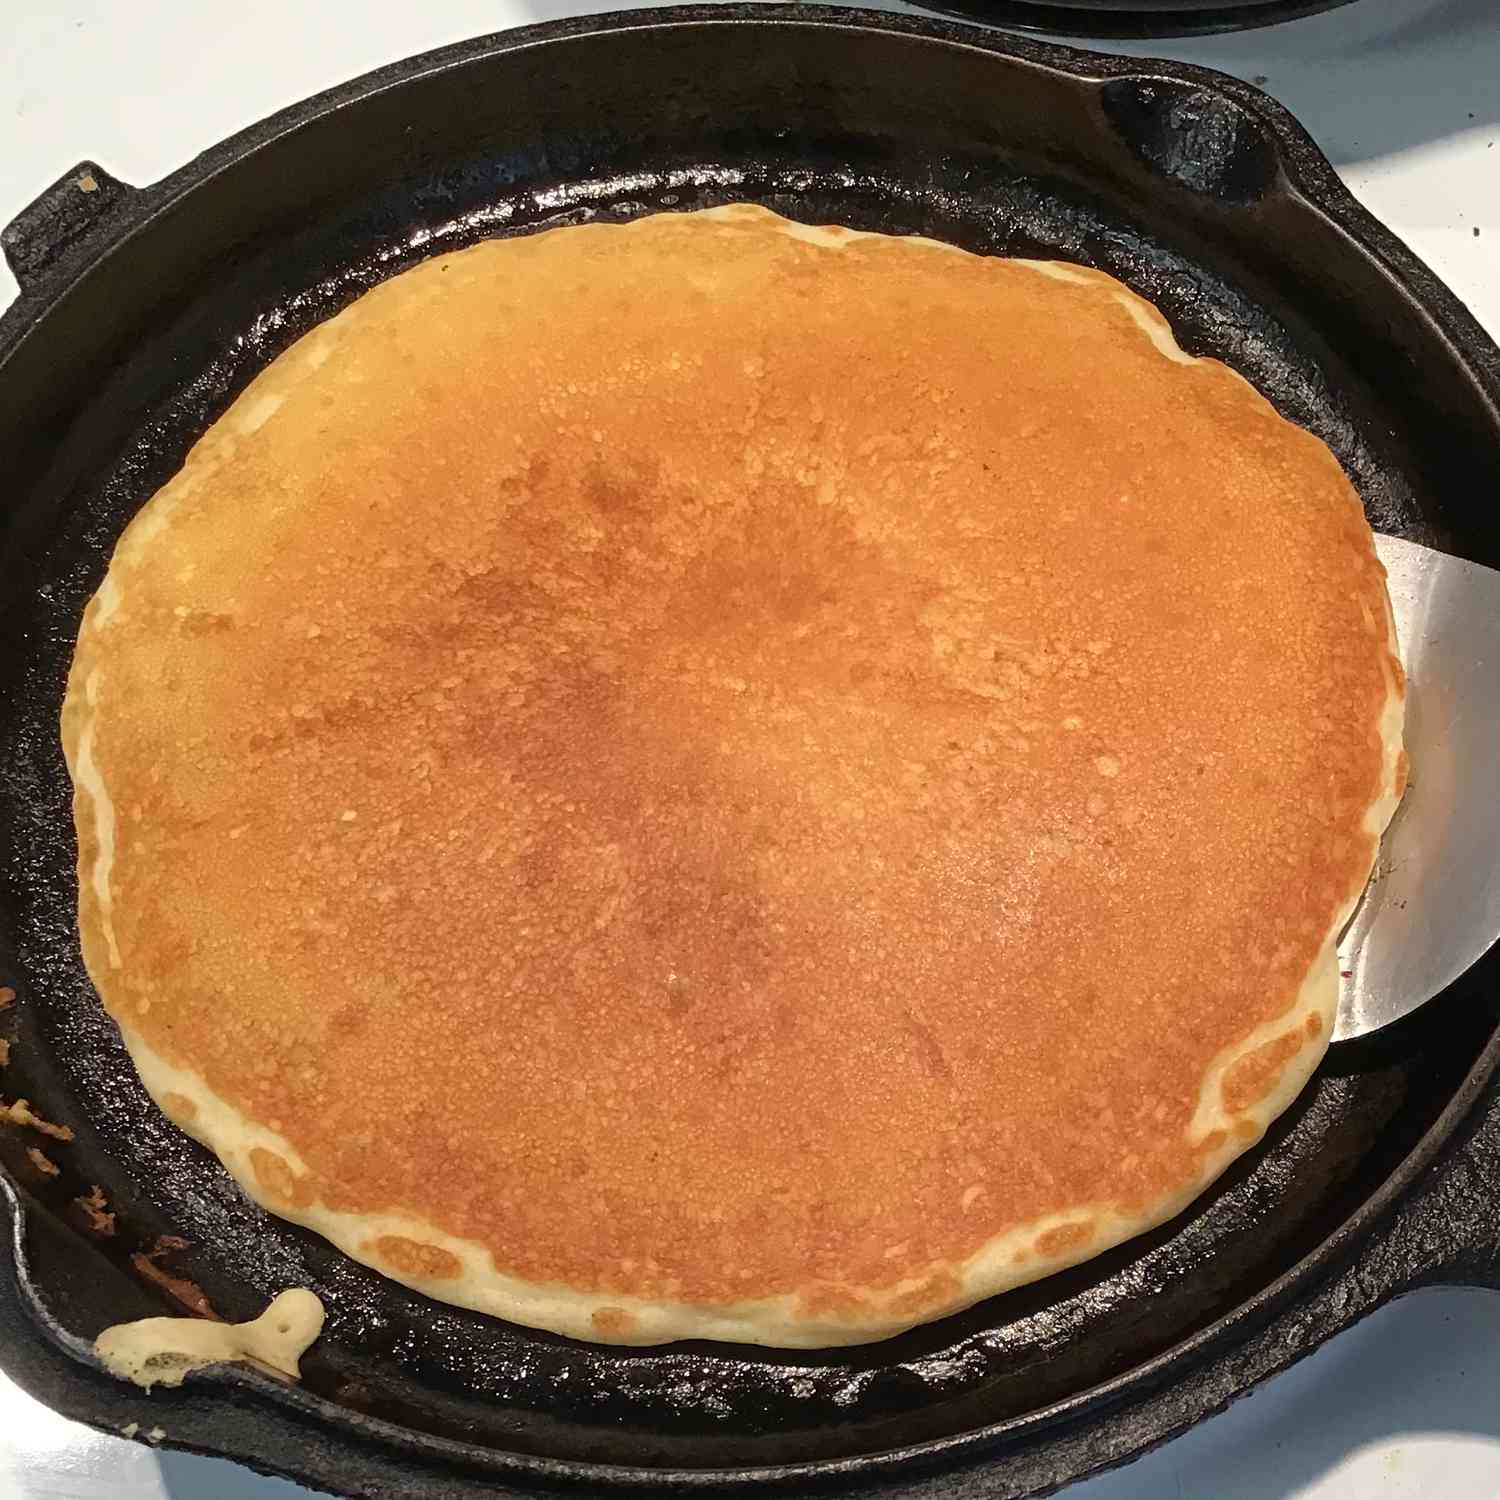 top-down view of a big golden-brown pancake in a cast-iron skillet